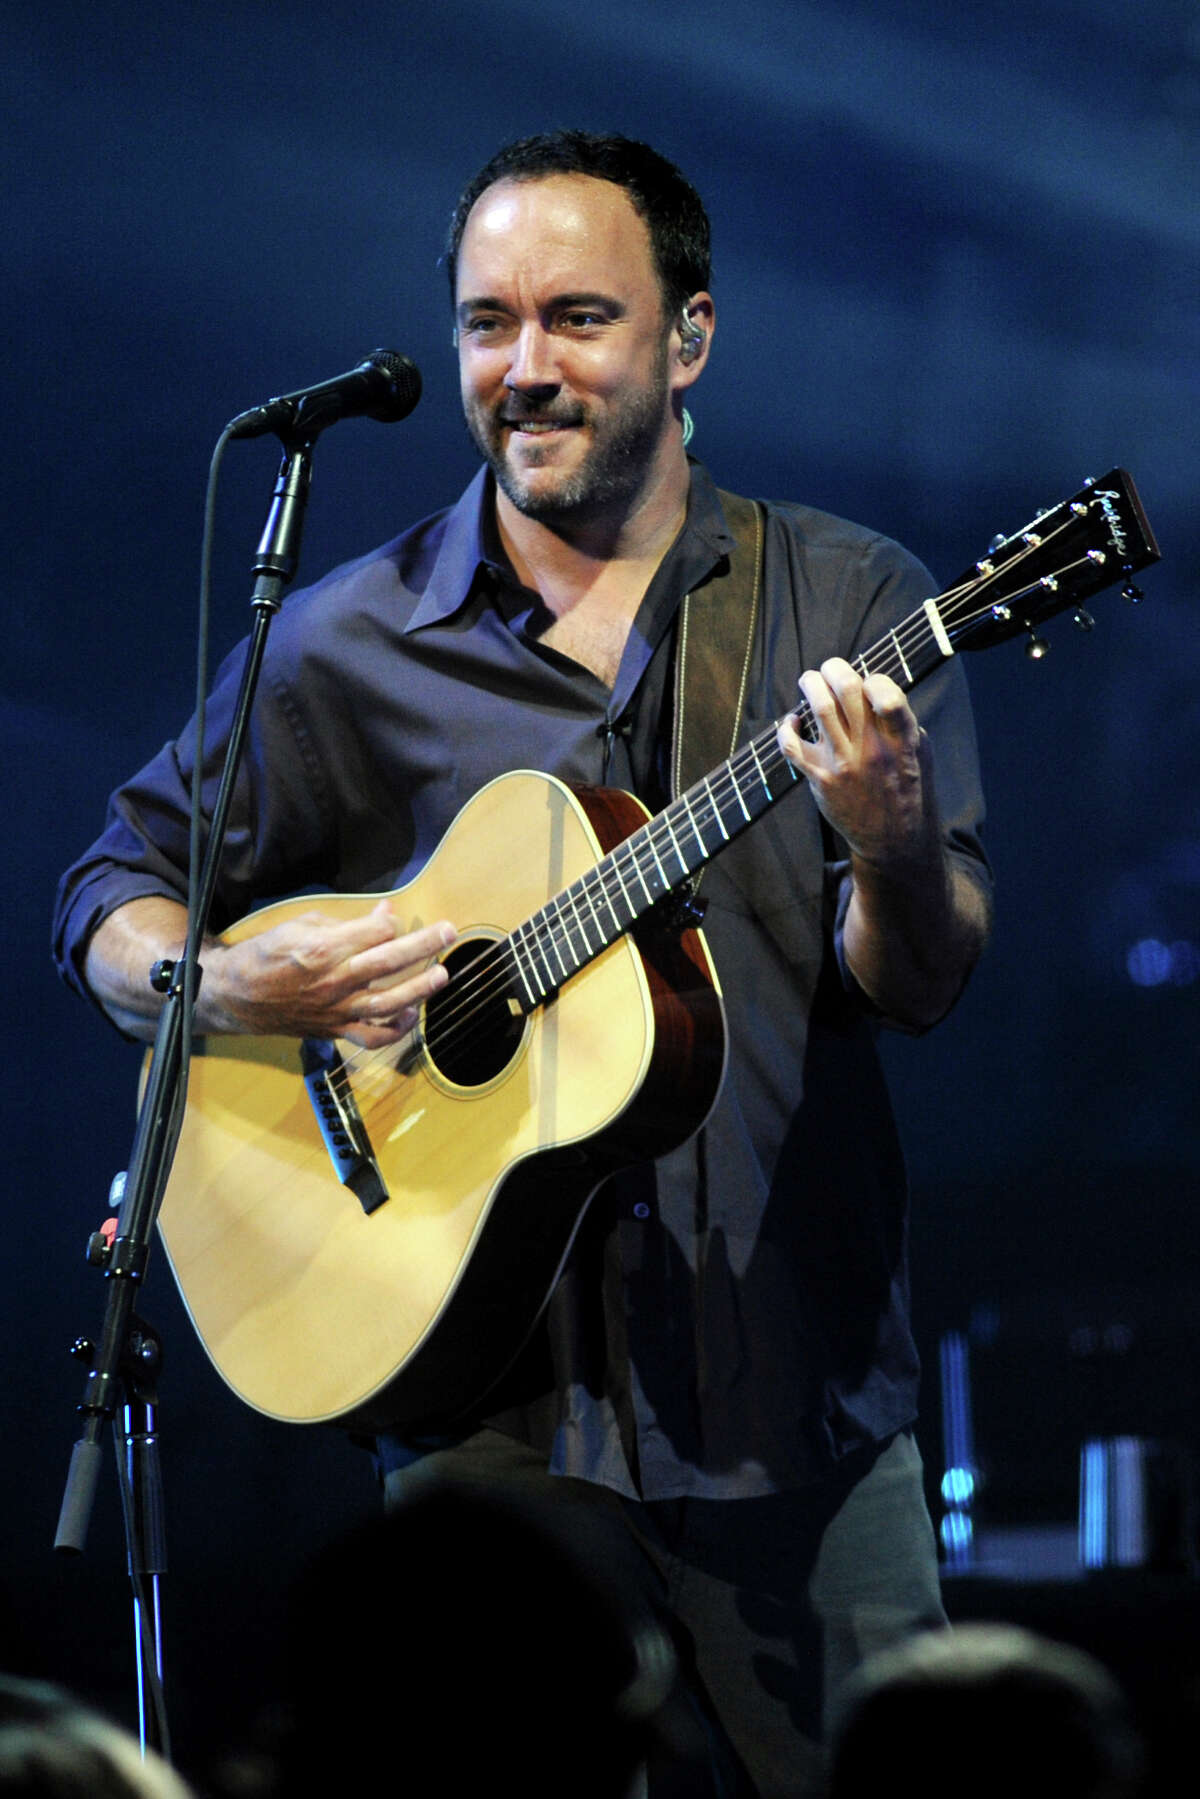 Dave Matthews performs with his band on Friday, July 3, 2015, at Saratoga Performing Arts Center in Saratoga Springs, N.Y. (Cindy Schultz / Times Union)